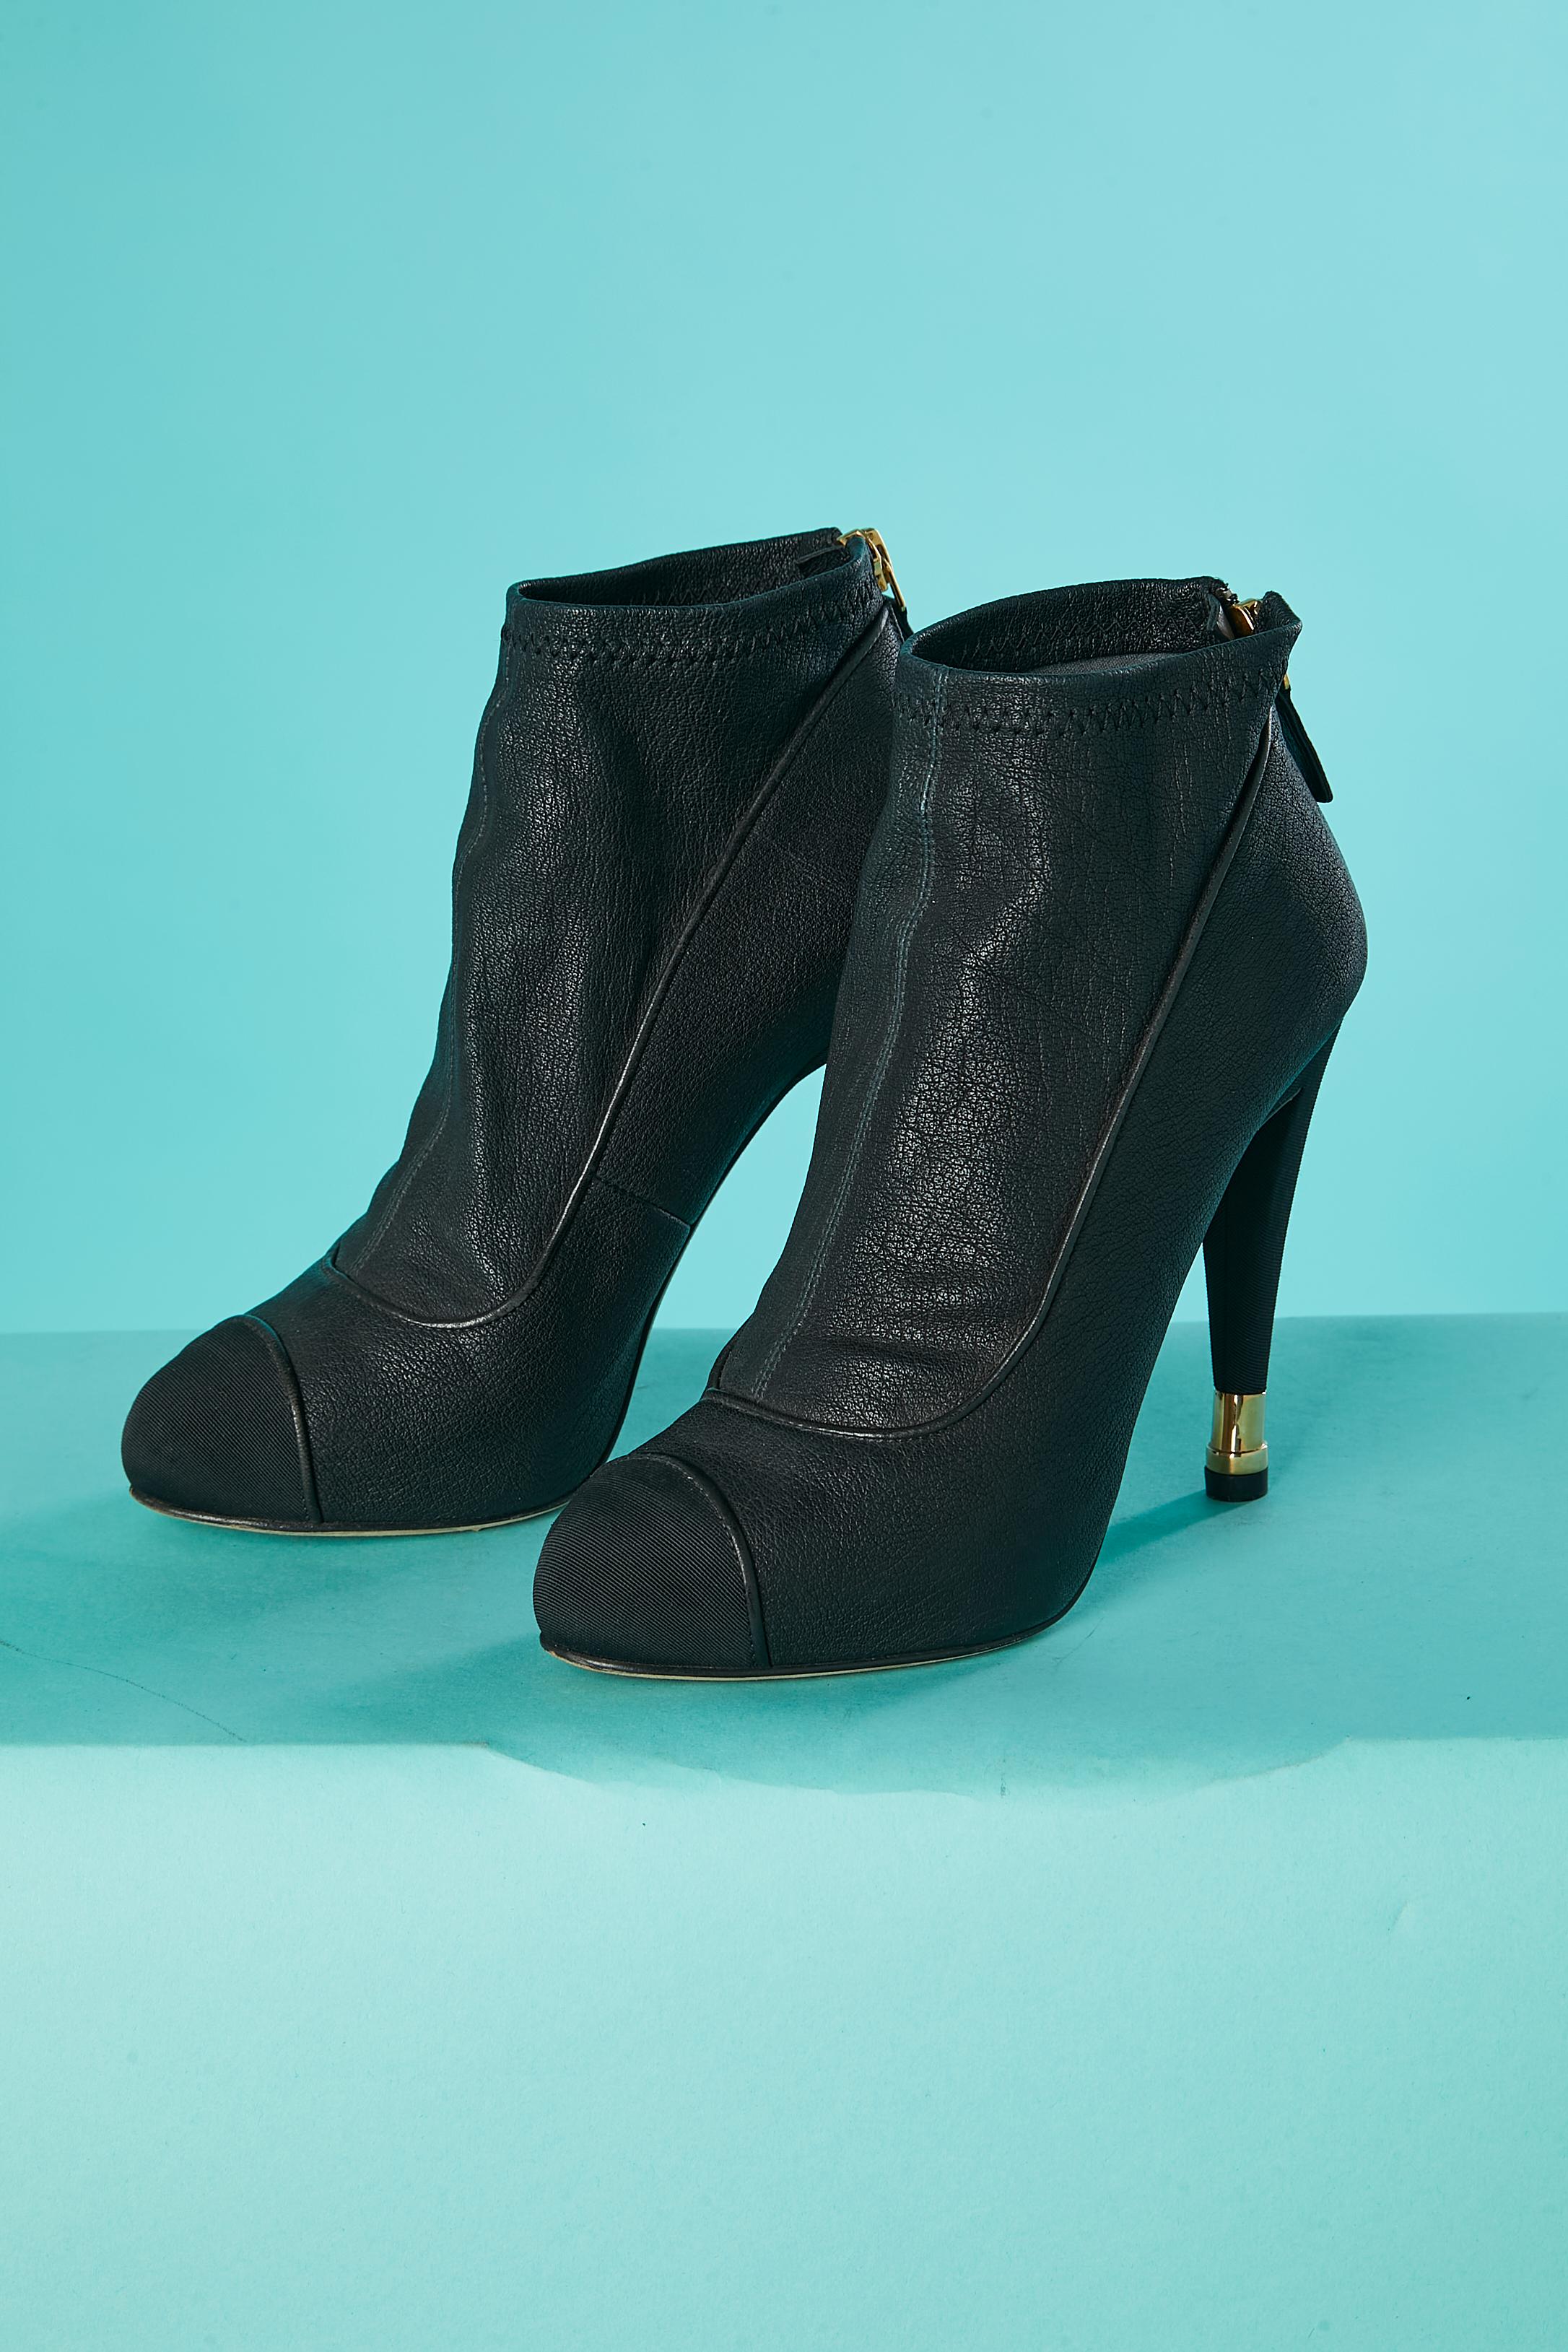 Black leather low boots with inside platform and metallic details on heel.Zip on the middle top back. Cut-work and leather piping.
Heel height : 11 cm
Inside Platform : 2 cm
SHOE SIZE : 36 